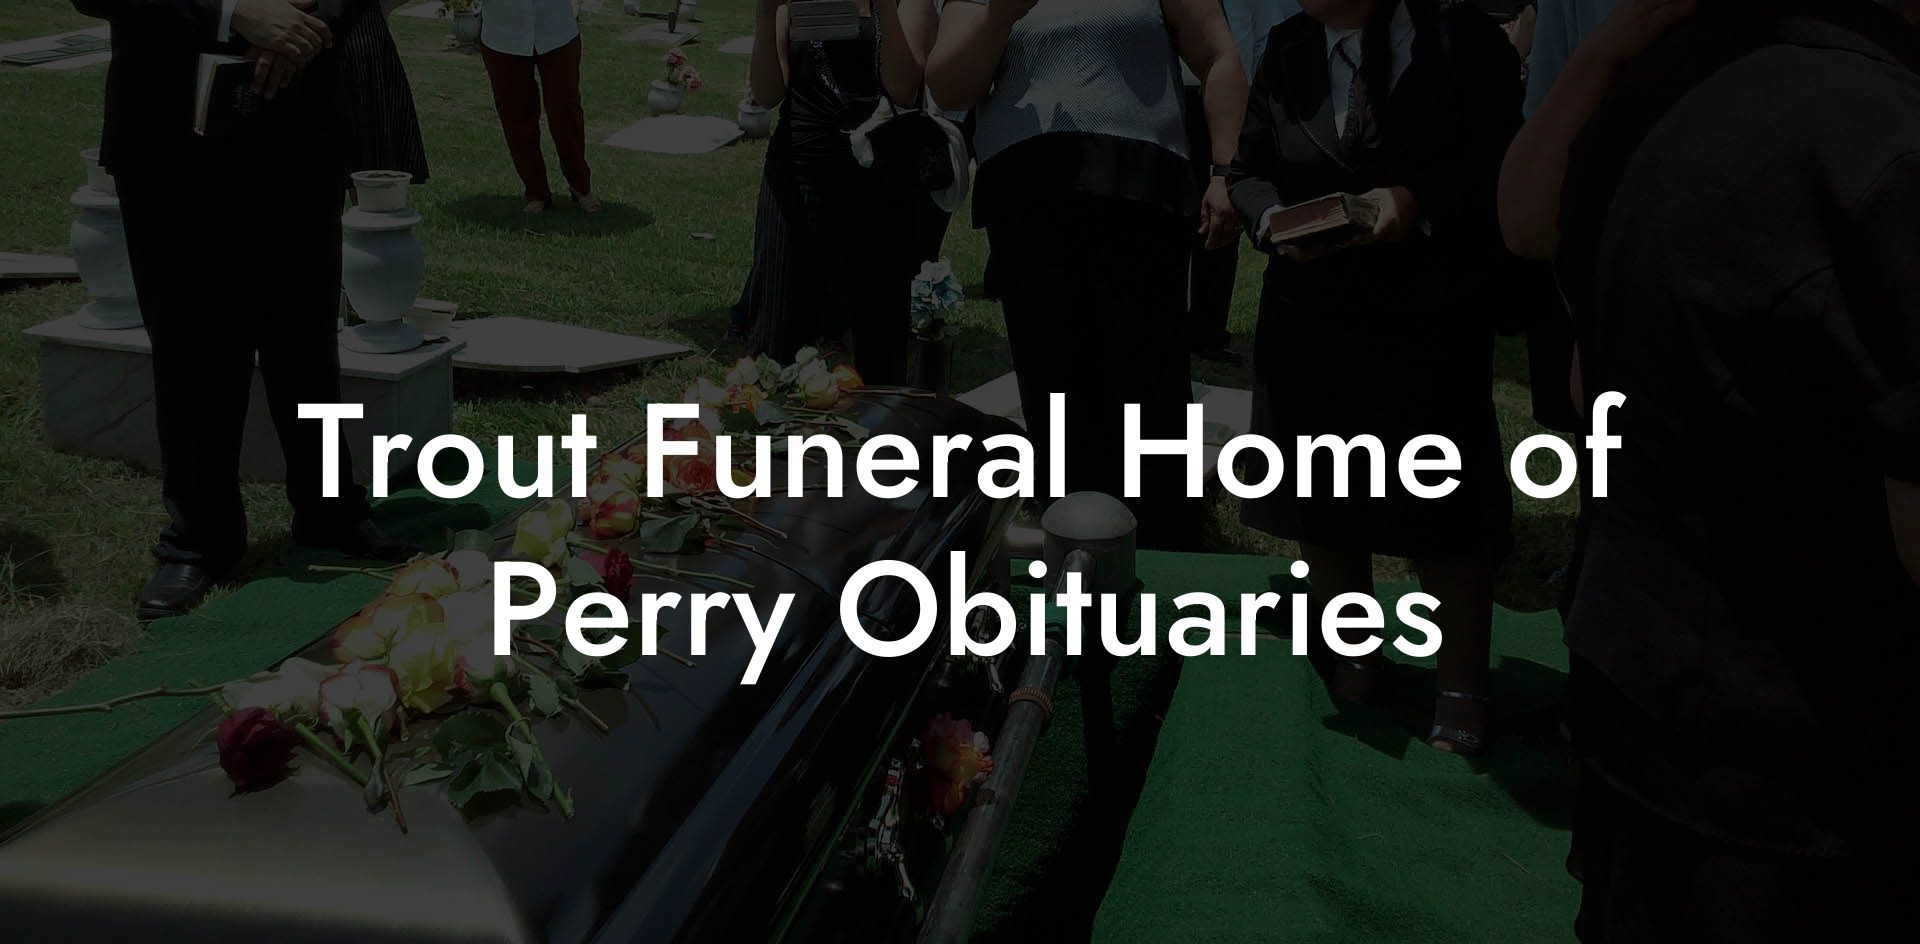 Trout Funeral Home of Perry Obituaries